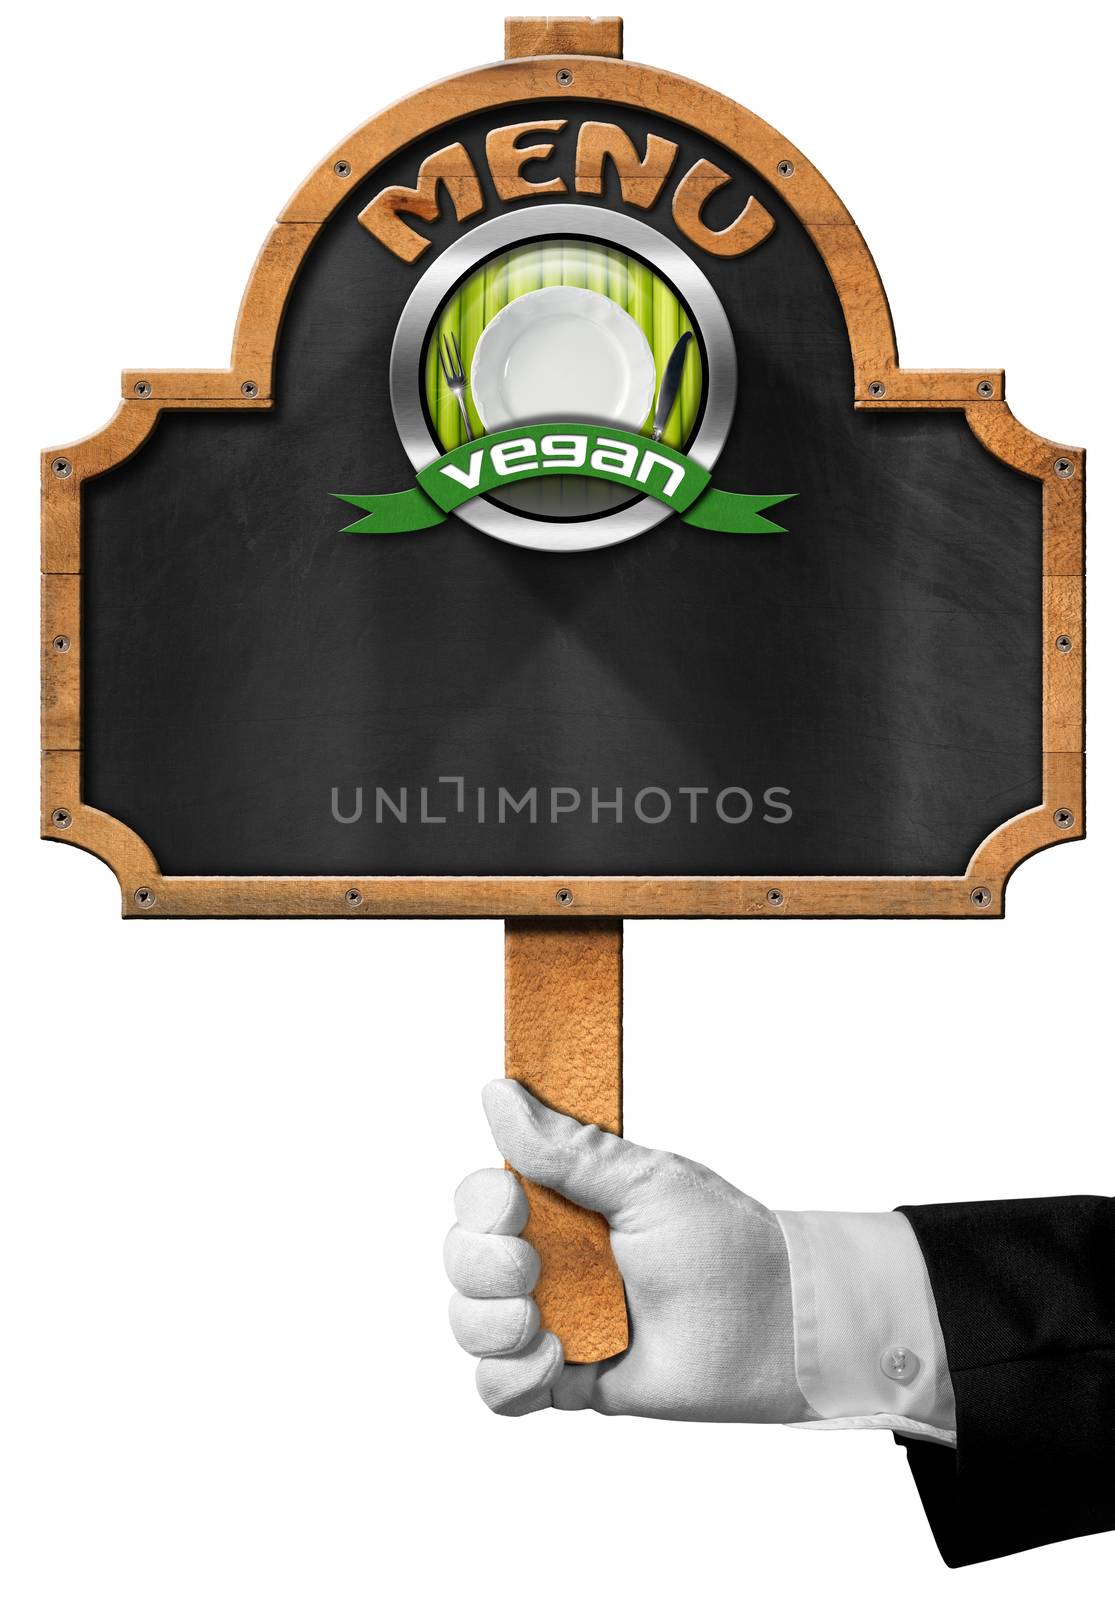 Hand of waiter with white glove holding a pole with empty blackboard, vegan symbol with empty white plate and silver cutlery. Isolated on white background